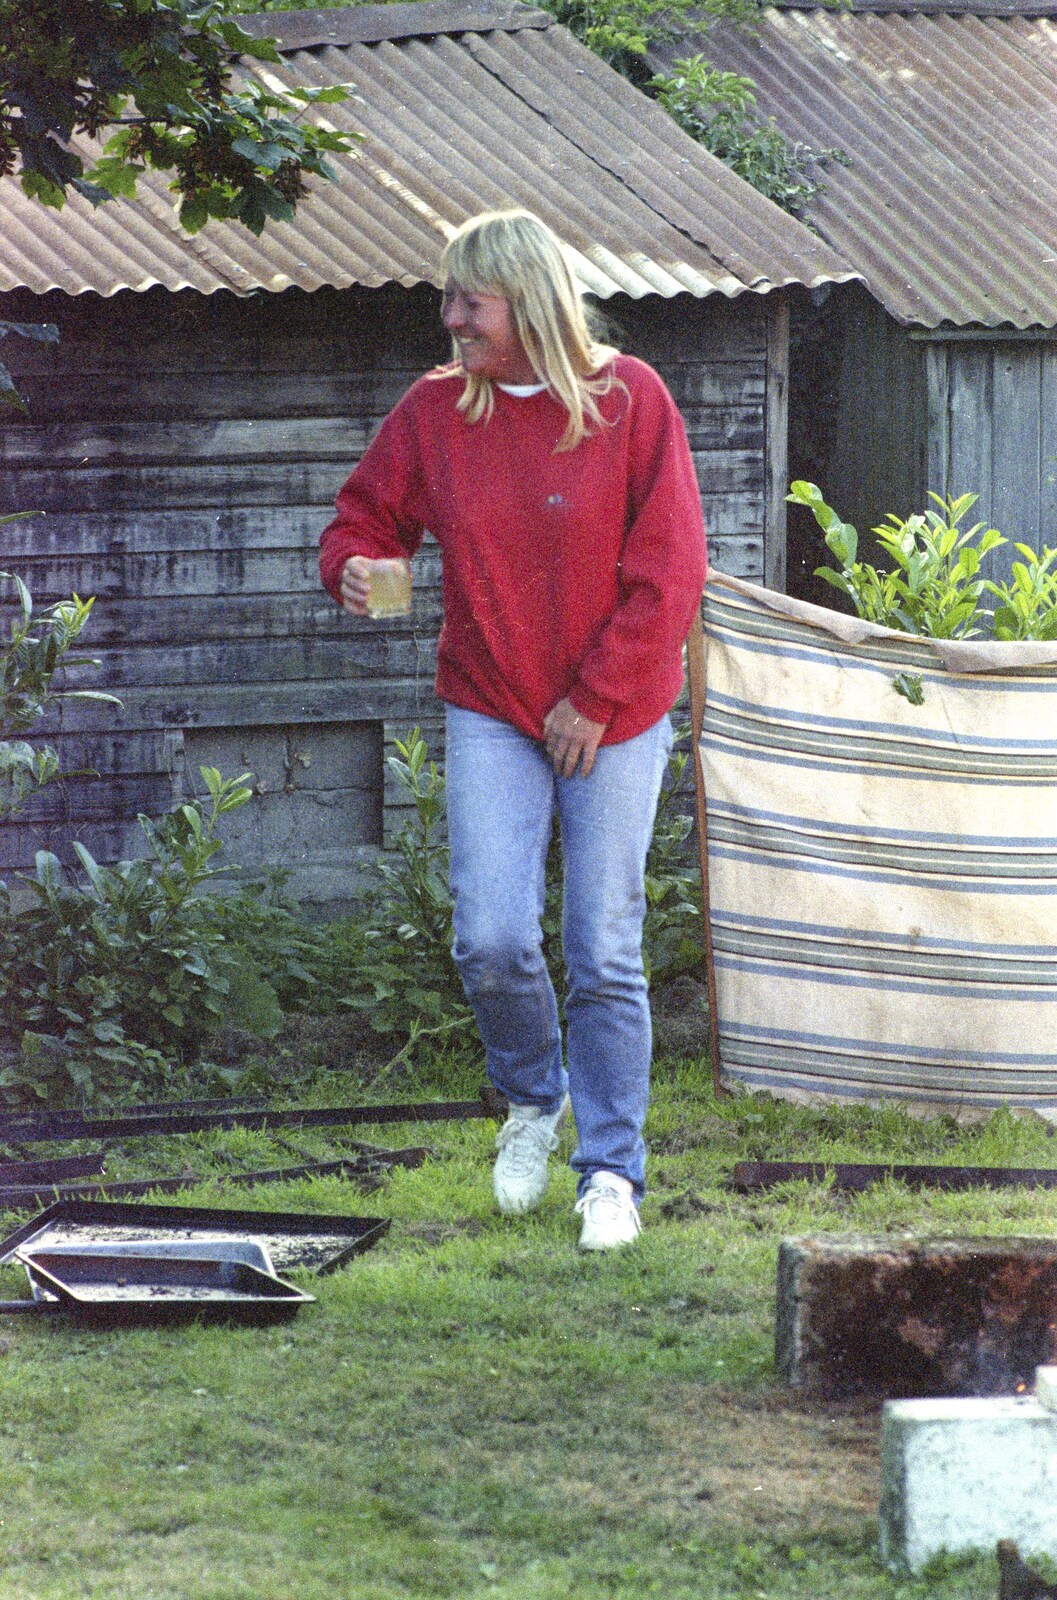 Mad Sue runs around with a cider in hand from A Geoff and Brenda Barbeque, Stuston, Suffolk - 3rd April 1994